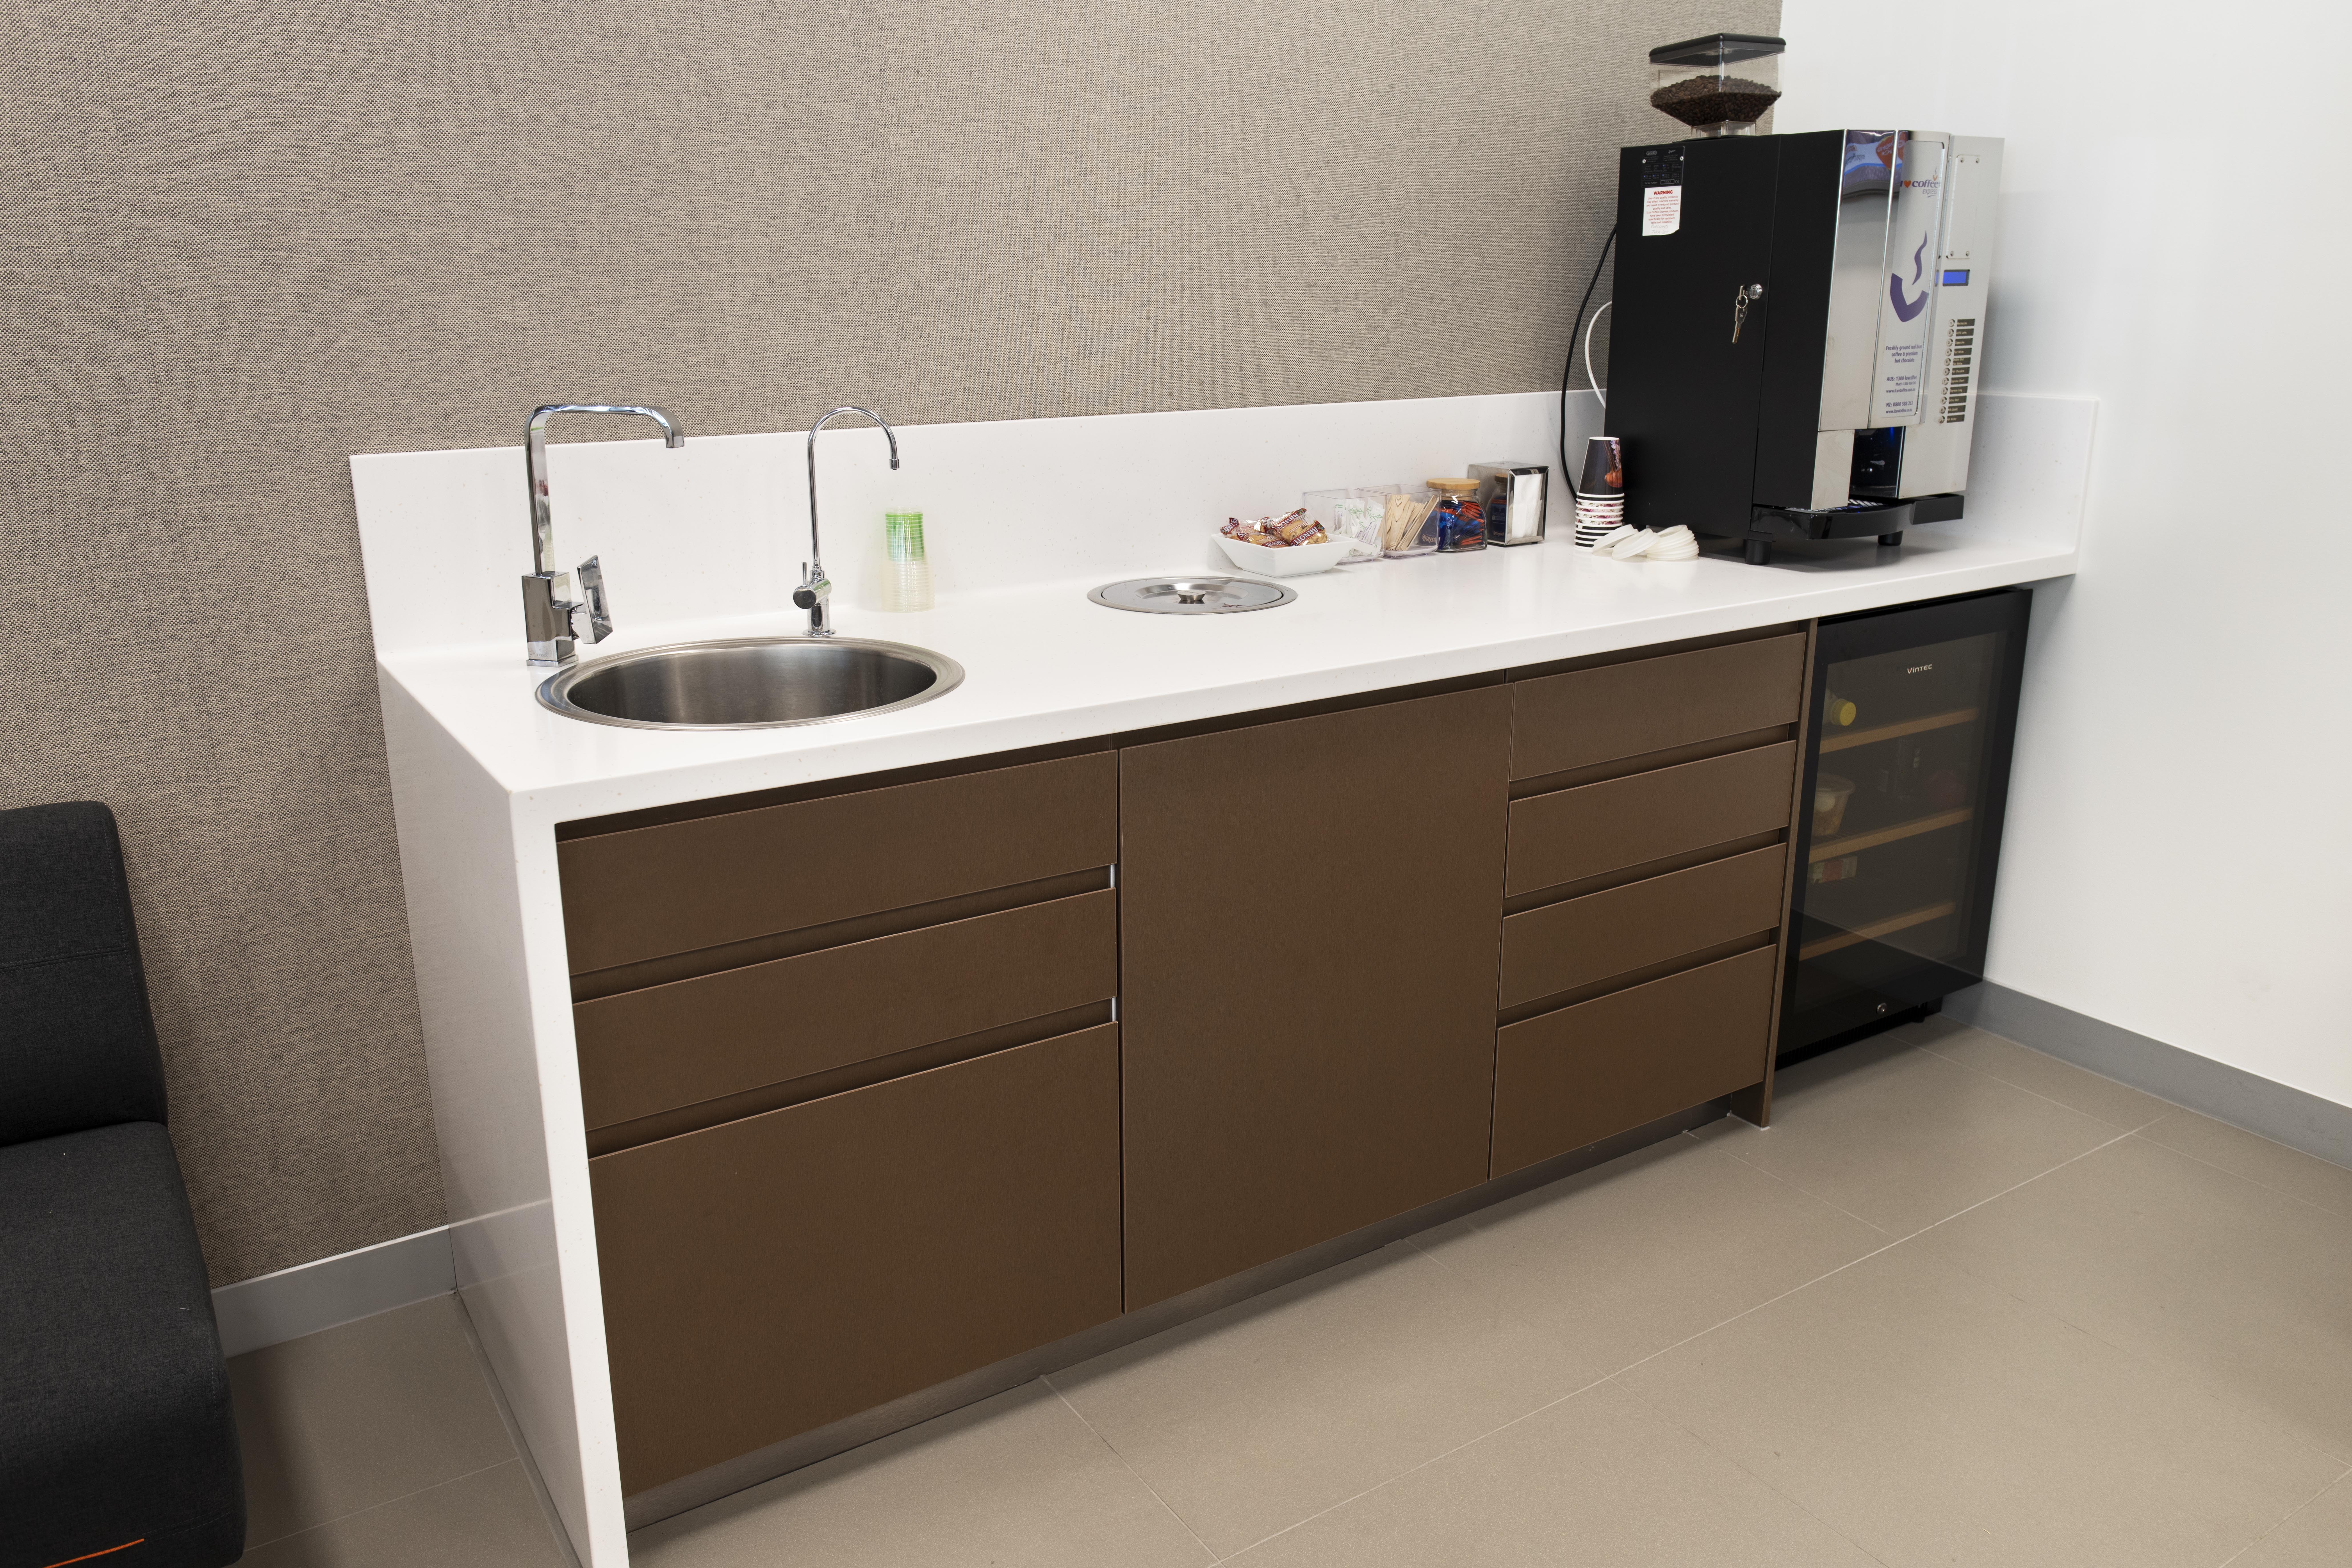 A custom kitchenette installed in an office